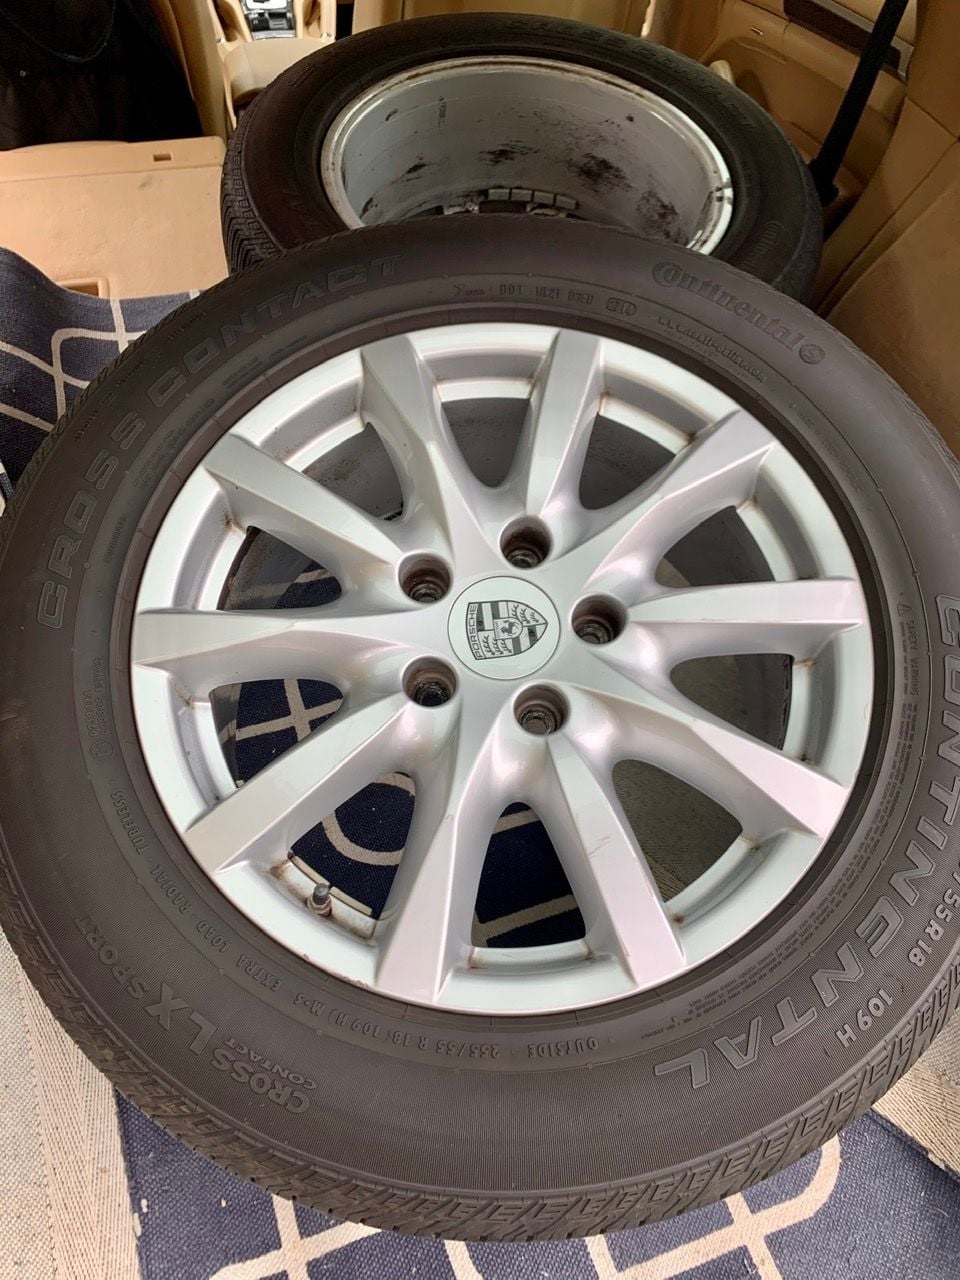 Wheels and Tires/Axles - porsche OEM (BBS) 18" Wheels and 255/55 R18 CrossContact LX Sport Tires - with TPMS - Used - 2011 to 2019 Porsche Cayenne - Palo Alto, CA 94306, United States